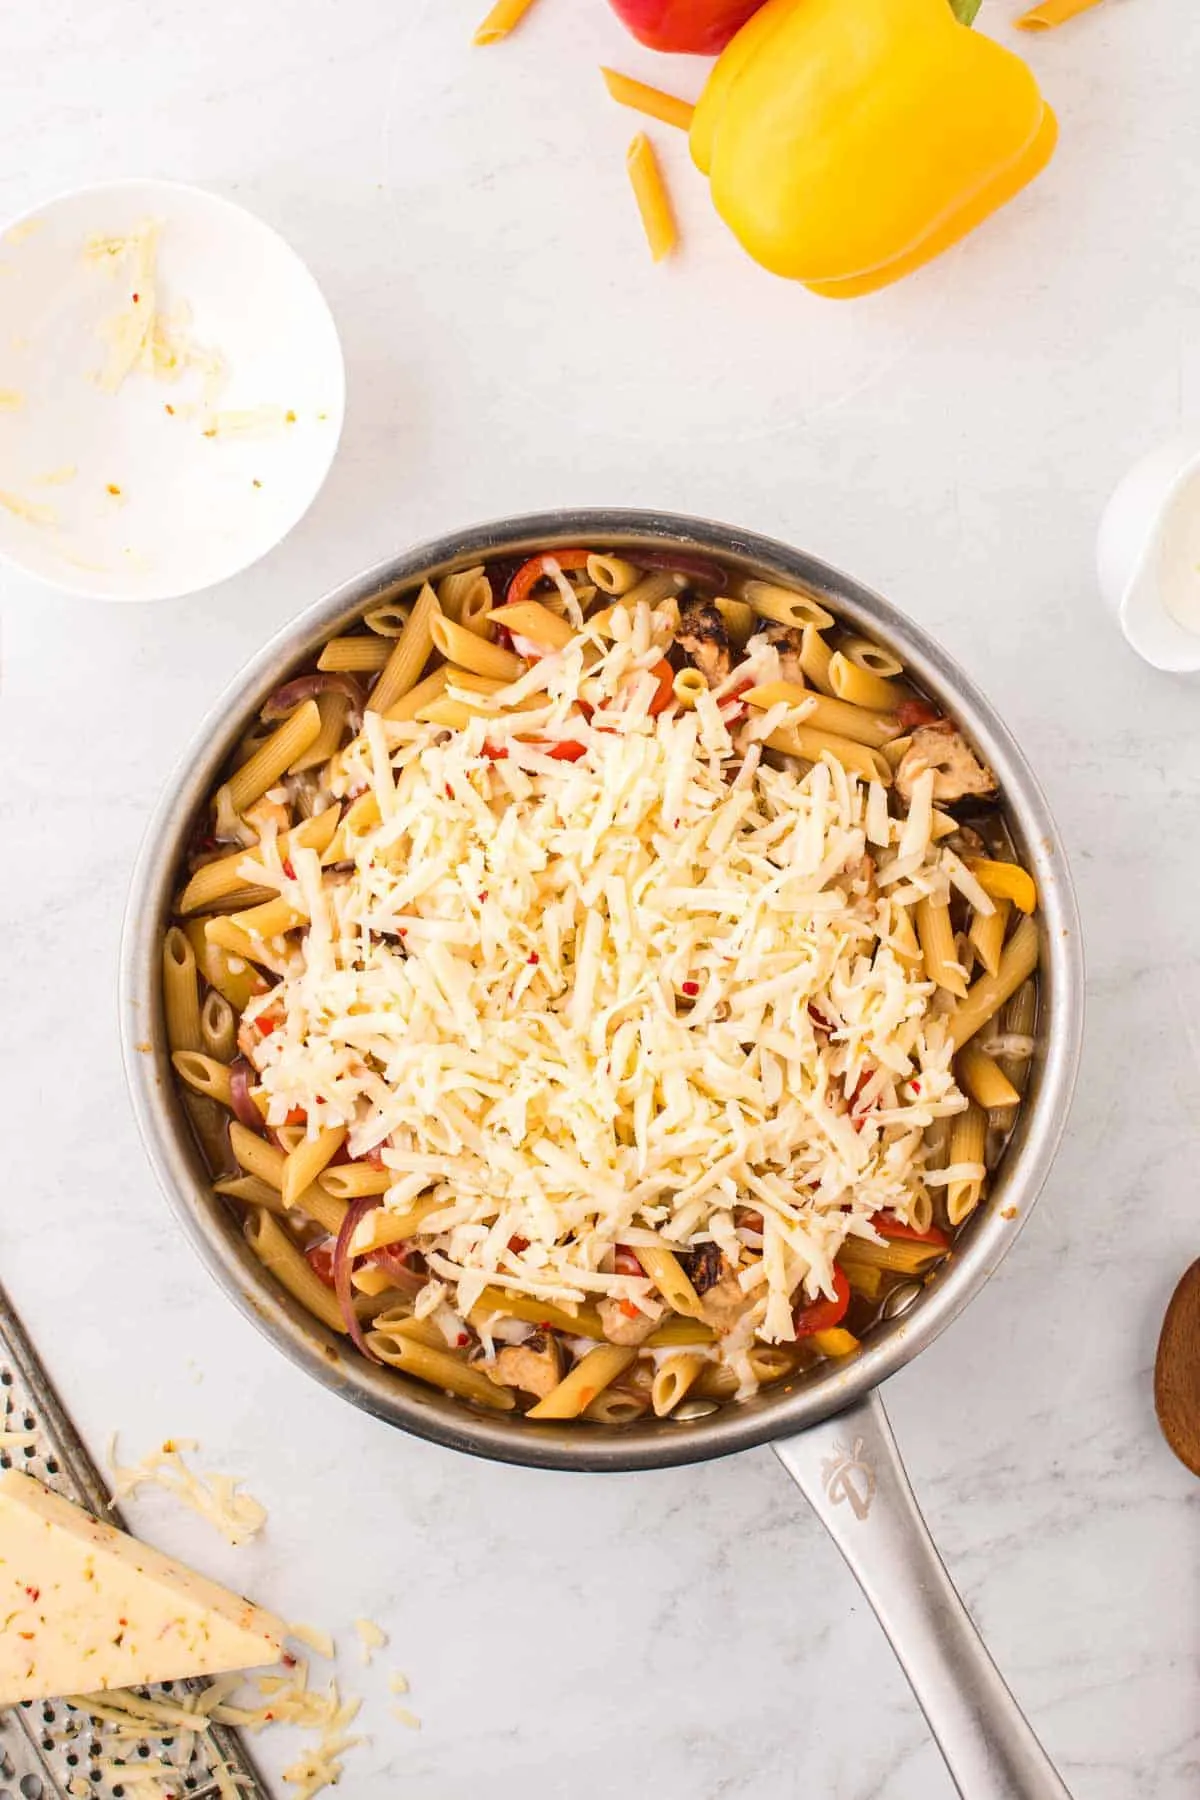 pepper jack cheese added to skillet with chicken penne pasta